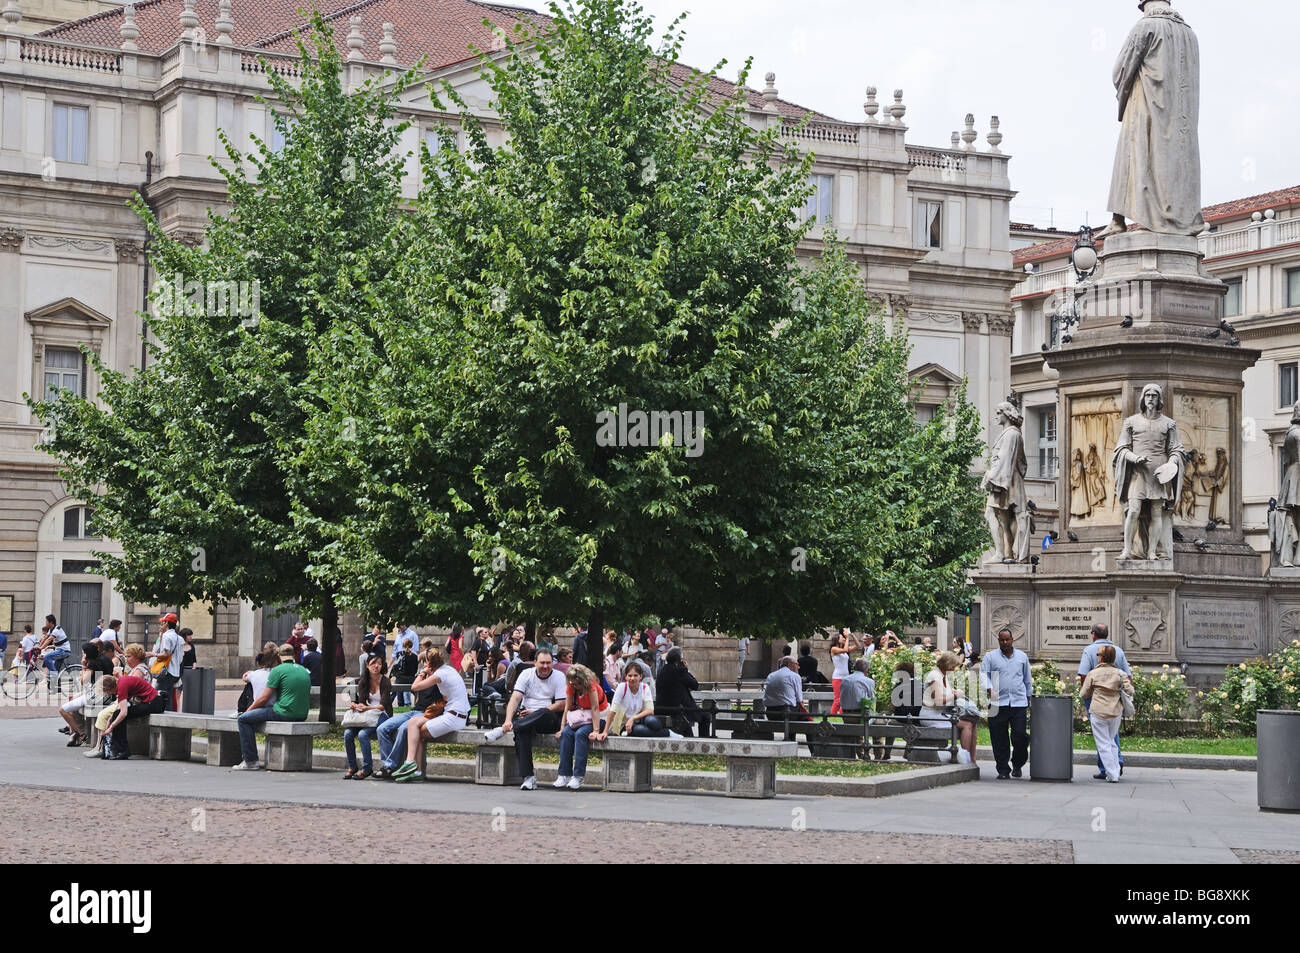 People relaxing on benches in Piazza dell Scala Milan Milano Italy Italia La Scala Opera House is behind the trees Stock Photo